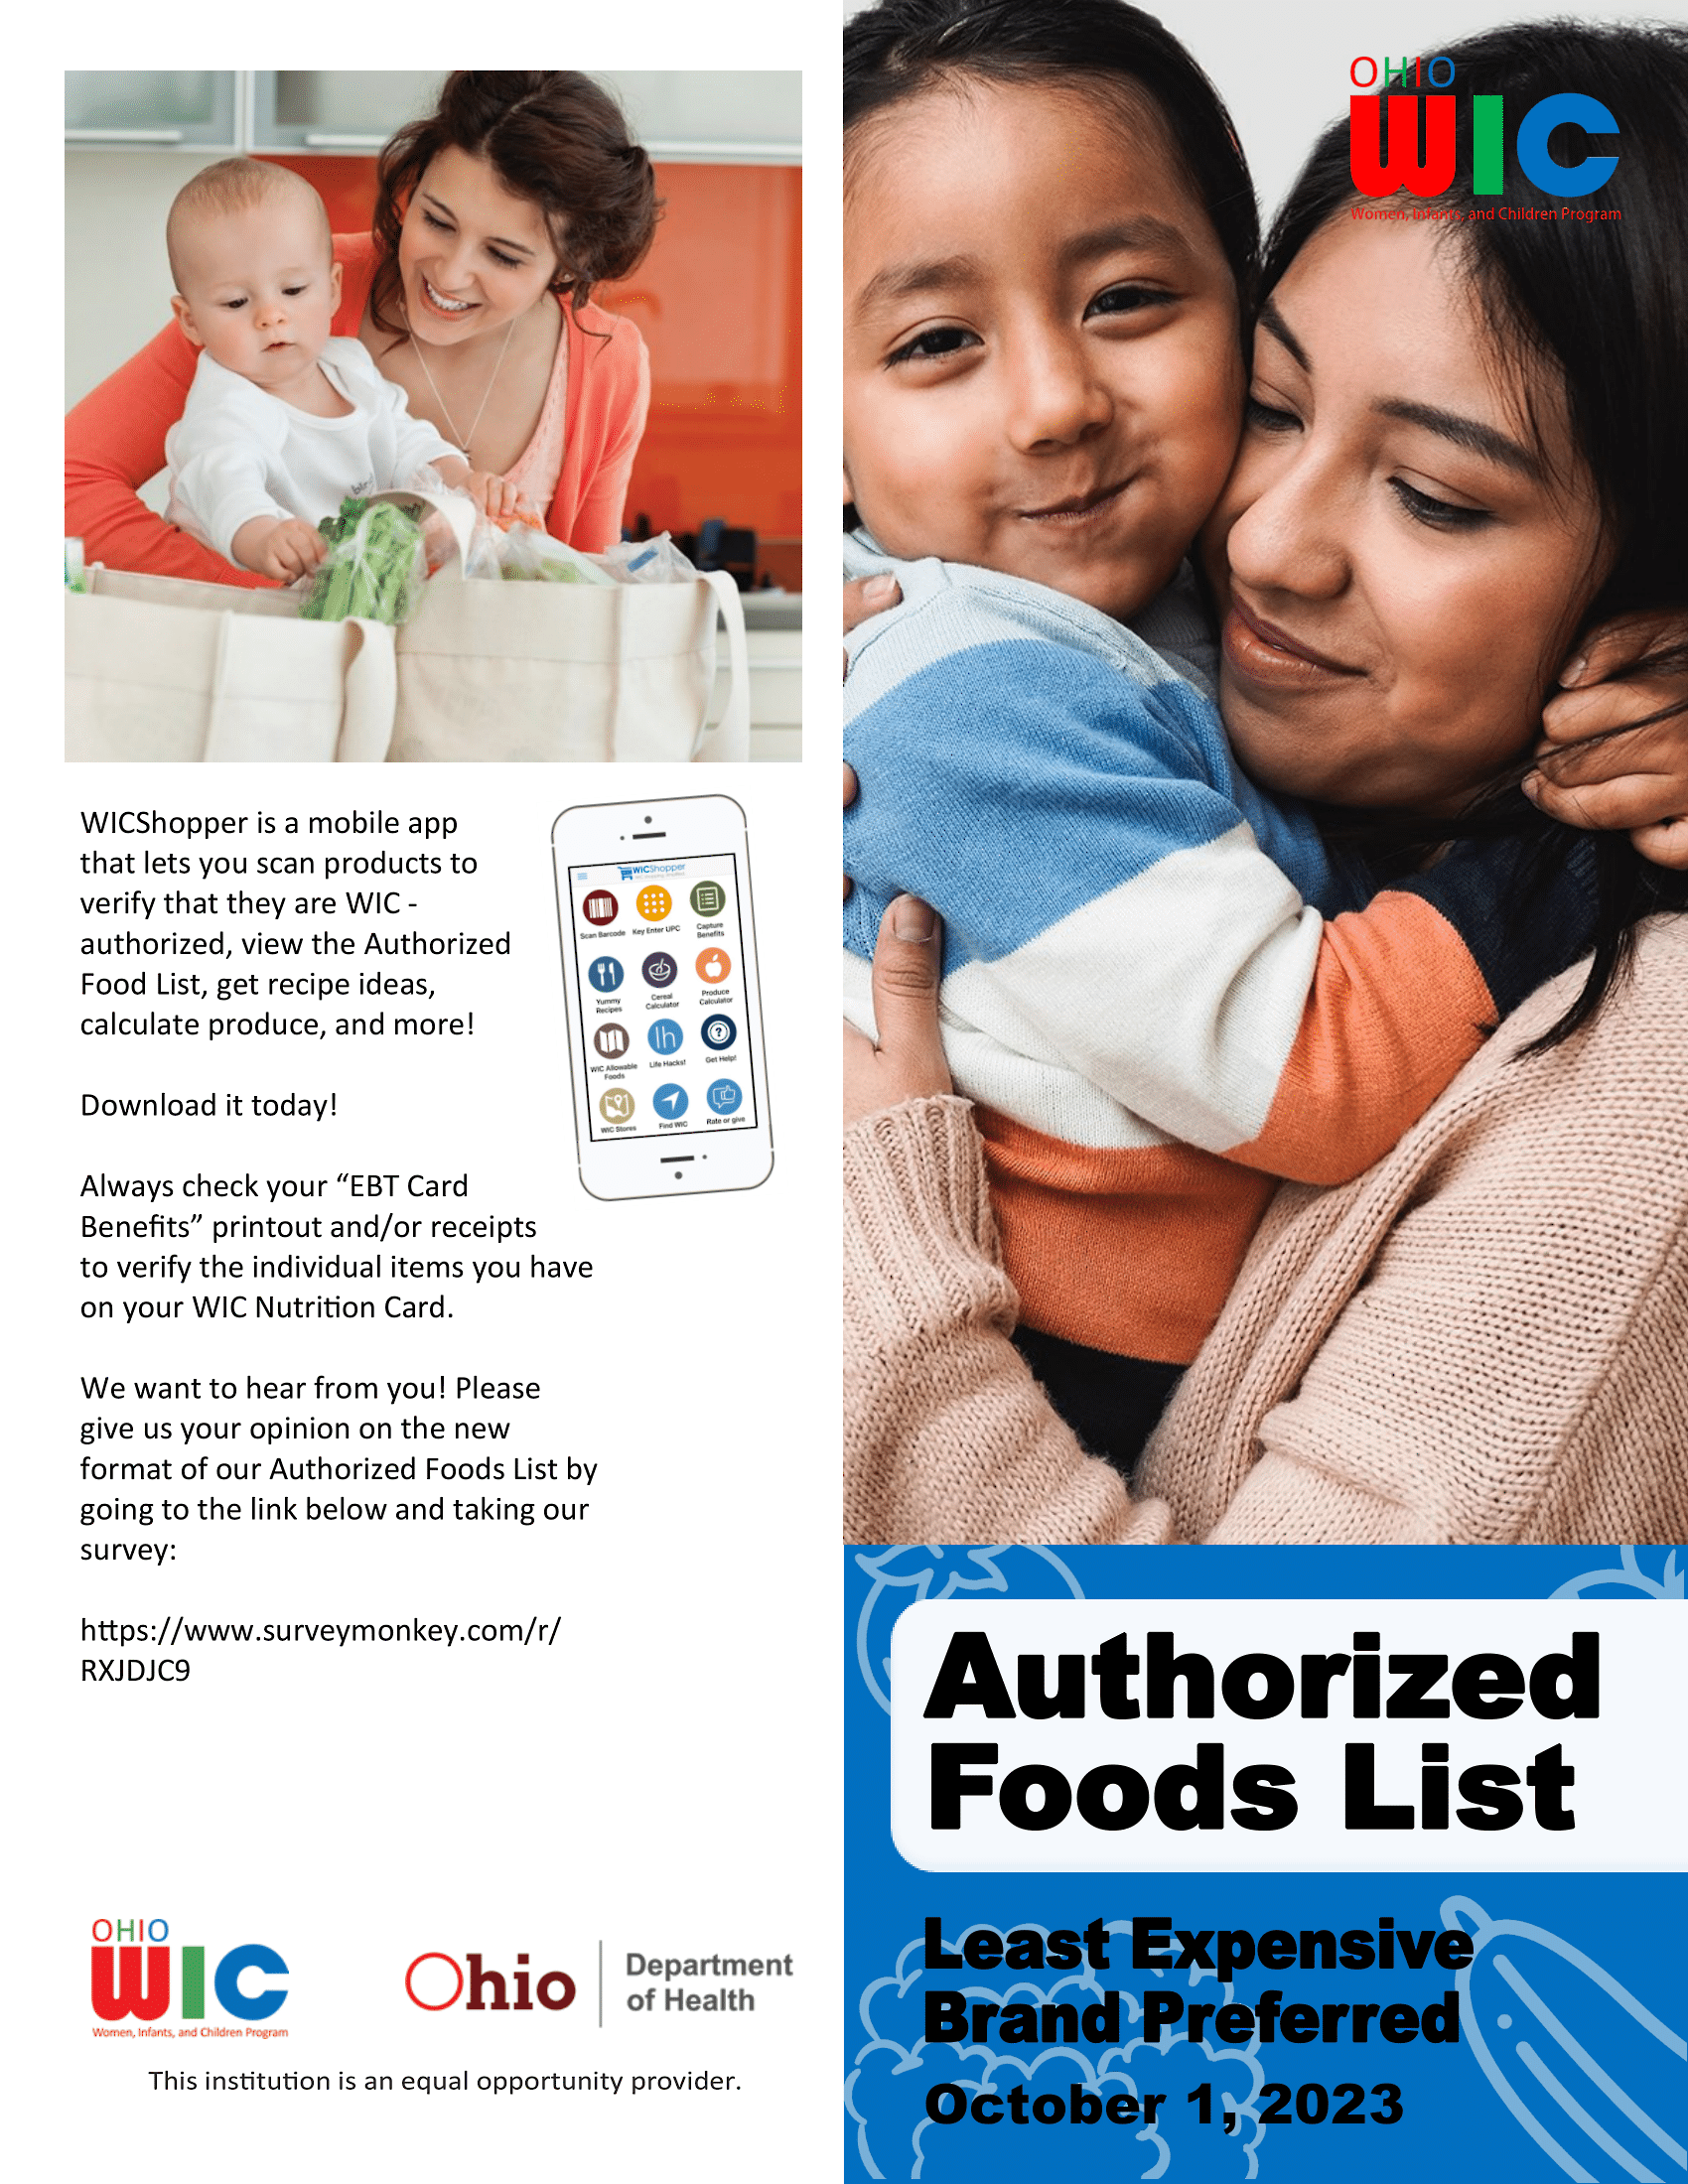 Title page "Authorized Food List"